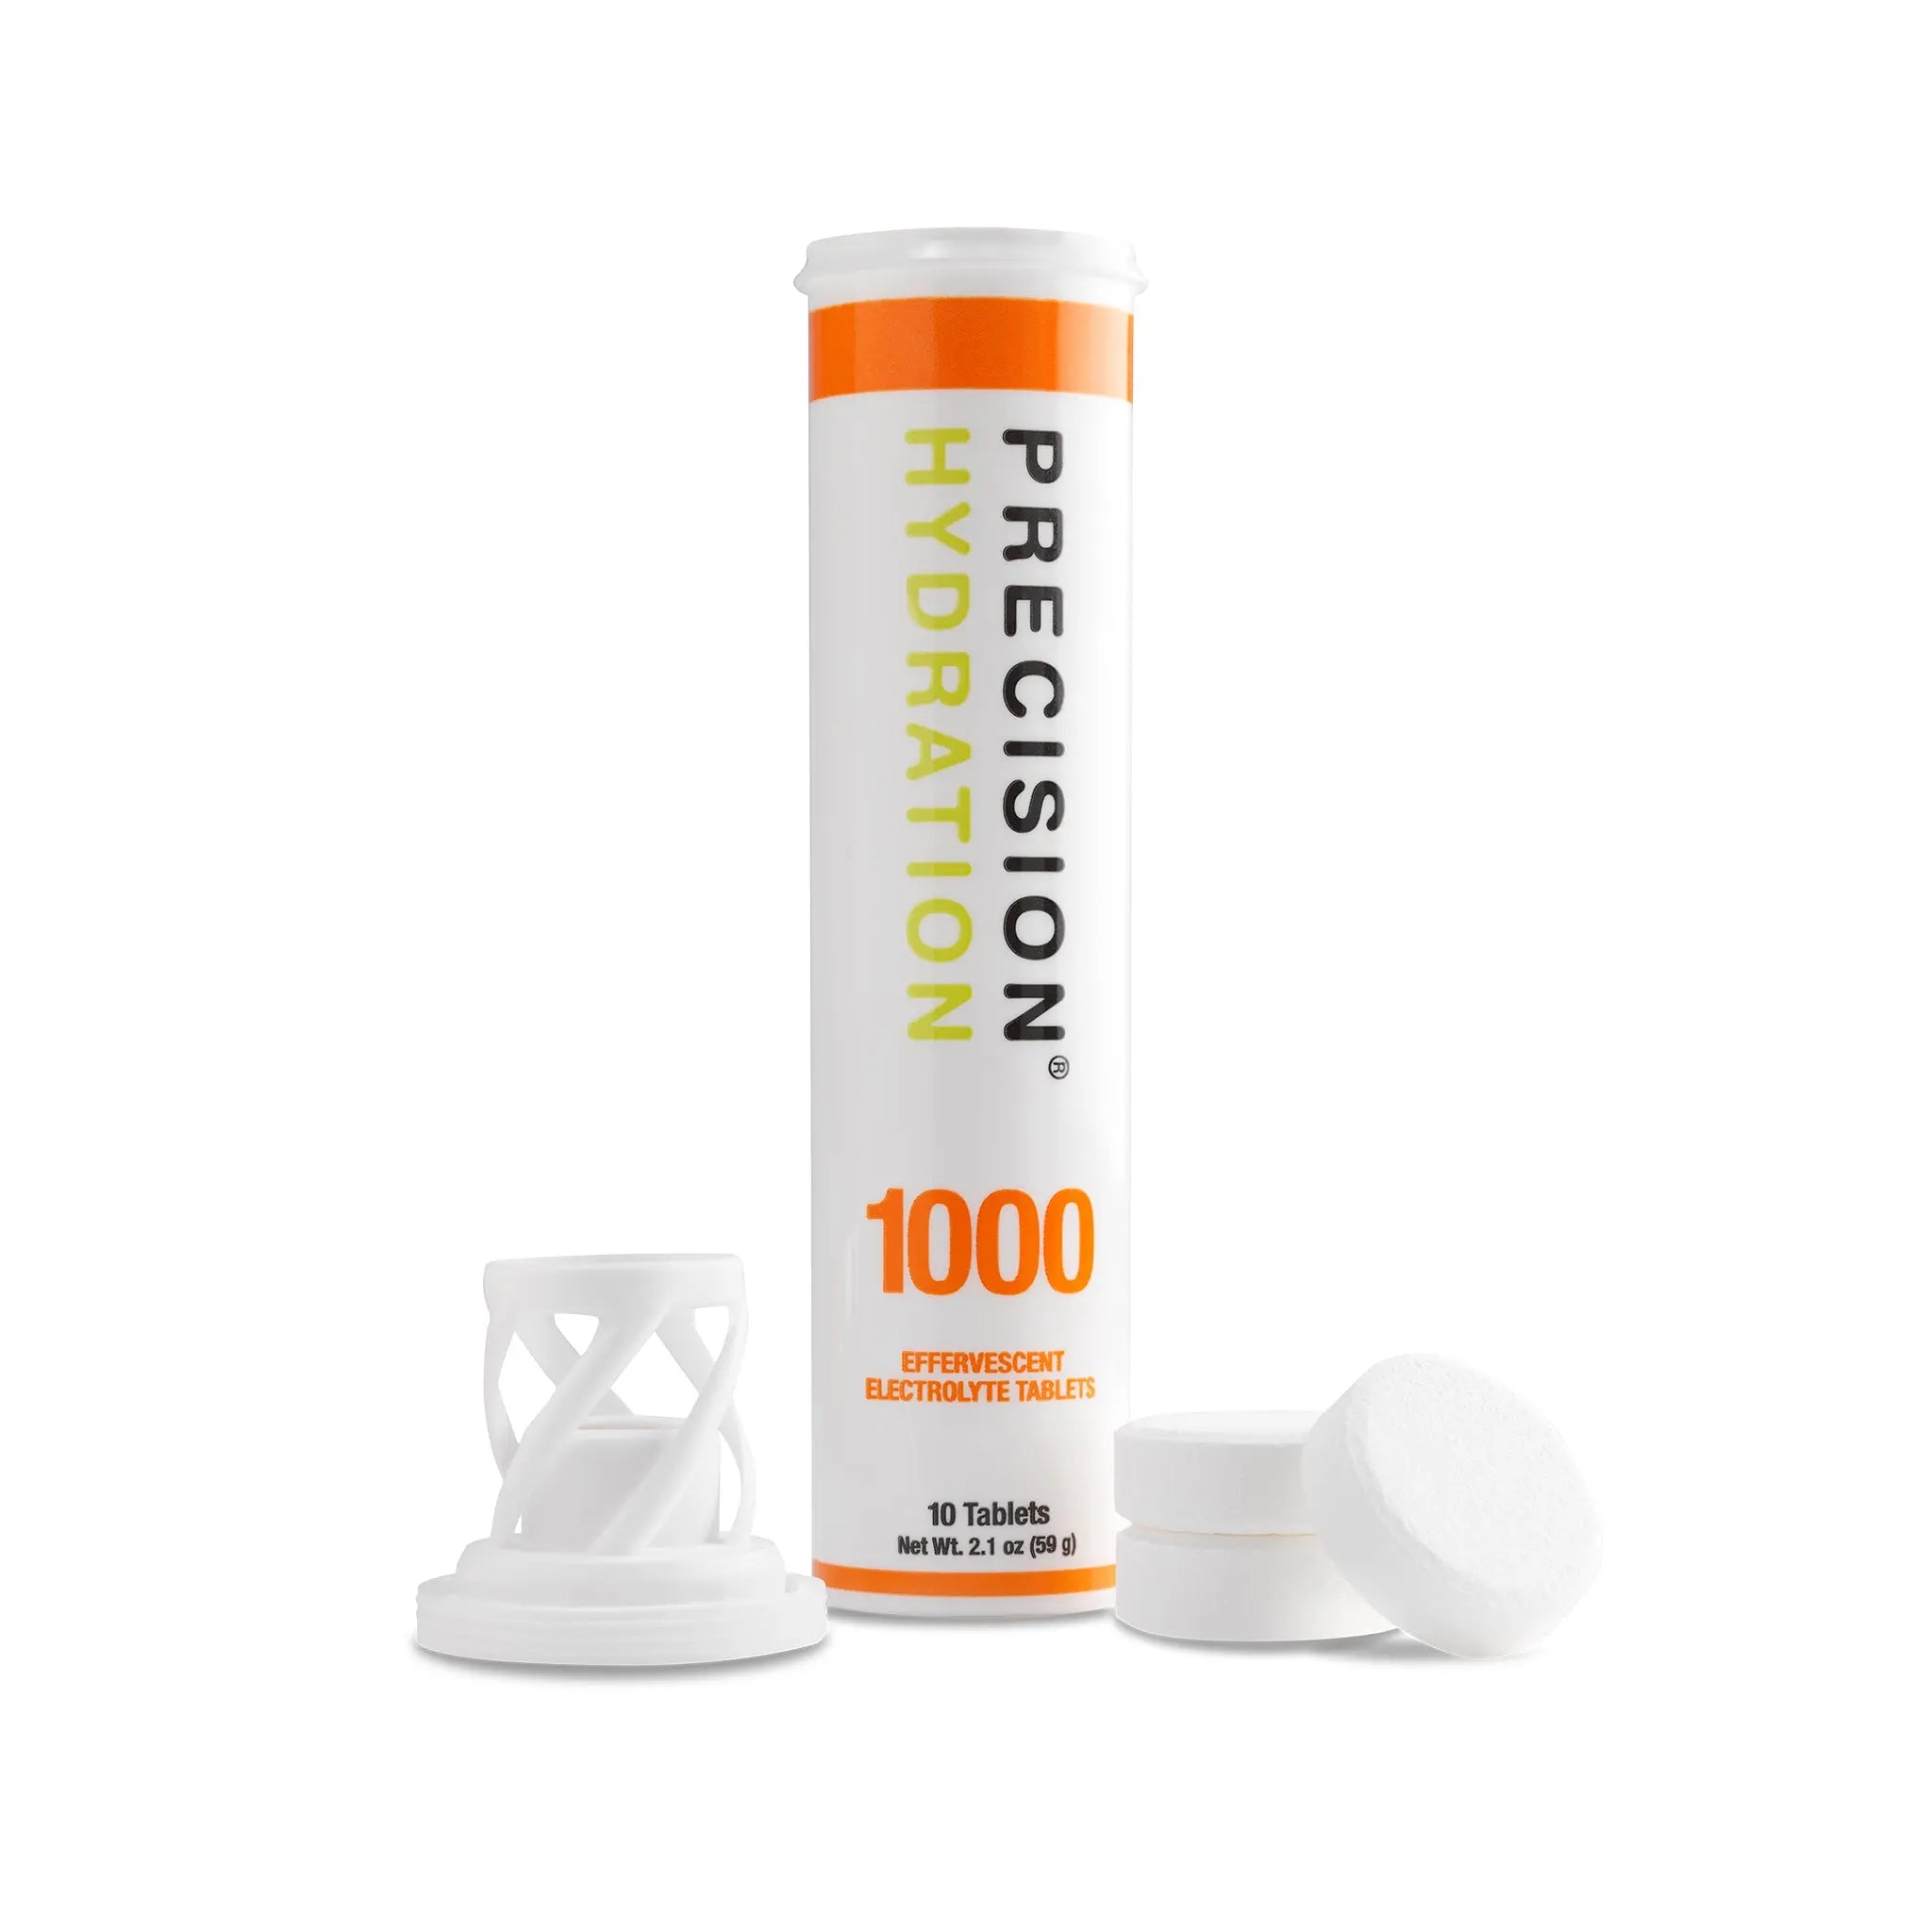 Precision Fuel & Hydration - PH 1000 Electrolyte Tablets